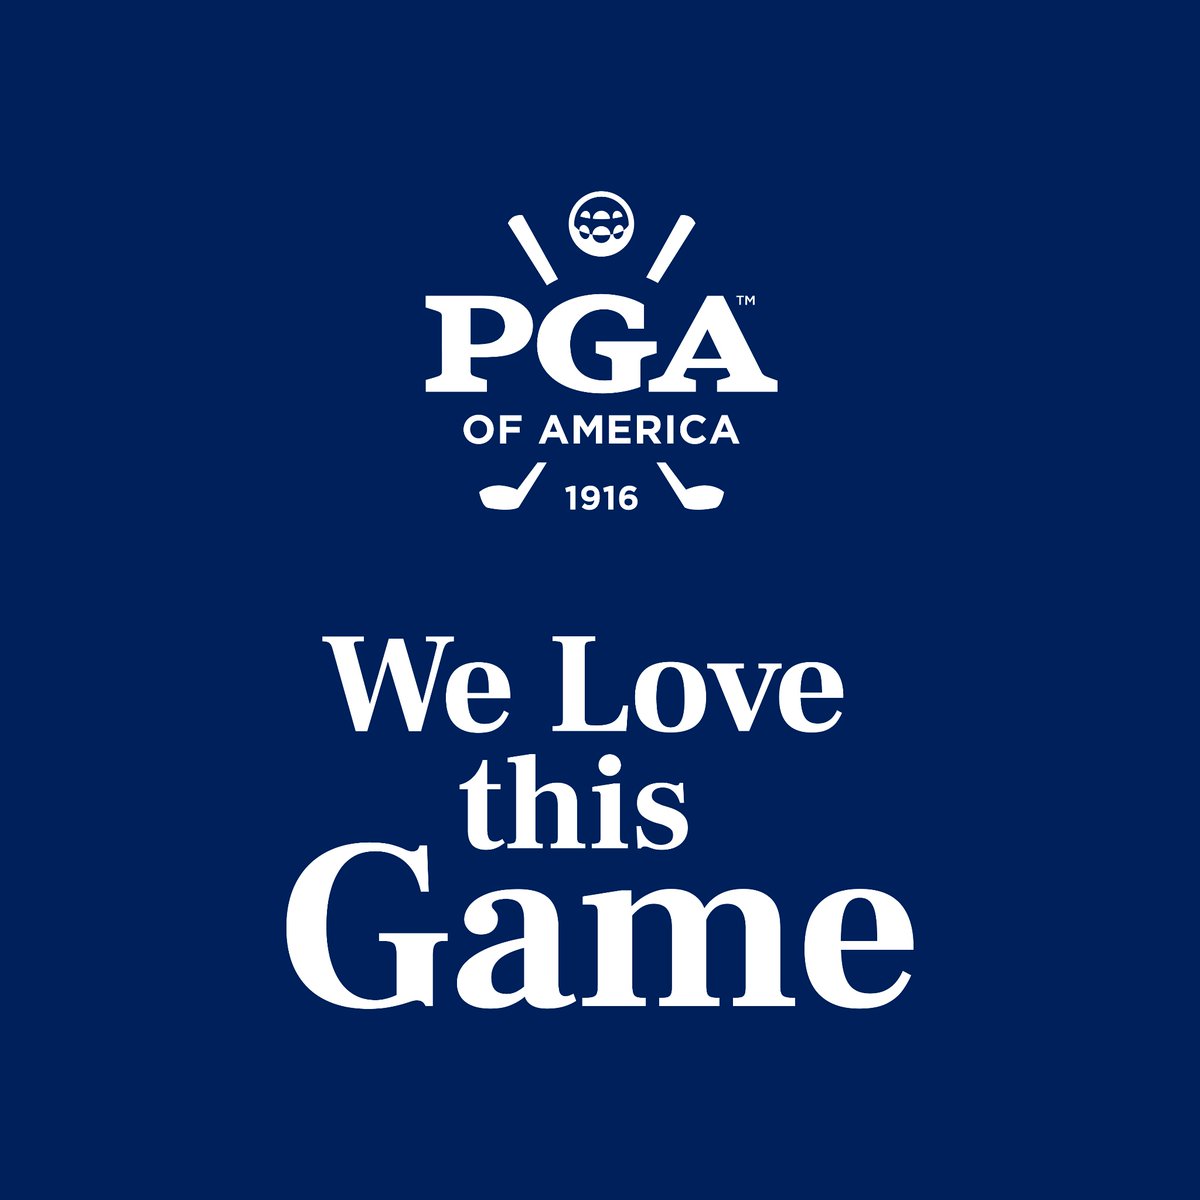 “We Love this Game” says it all.
As a freshman in high school I got my first job in golf. 22 years later and I havn’t worked another job. I am proud to have made a career as a PGA of America Golf Professional. 

#PGAofAmerica #WeLovethisGame